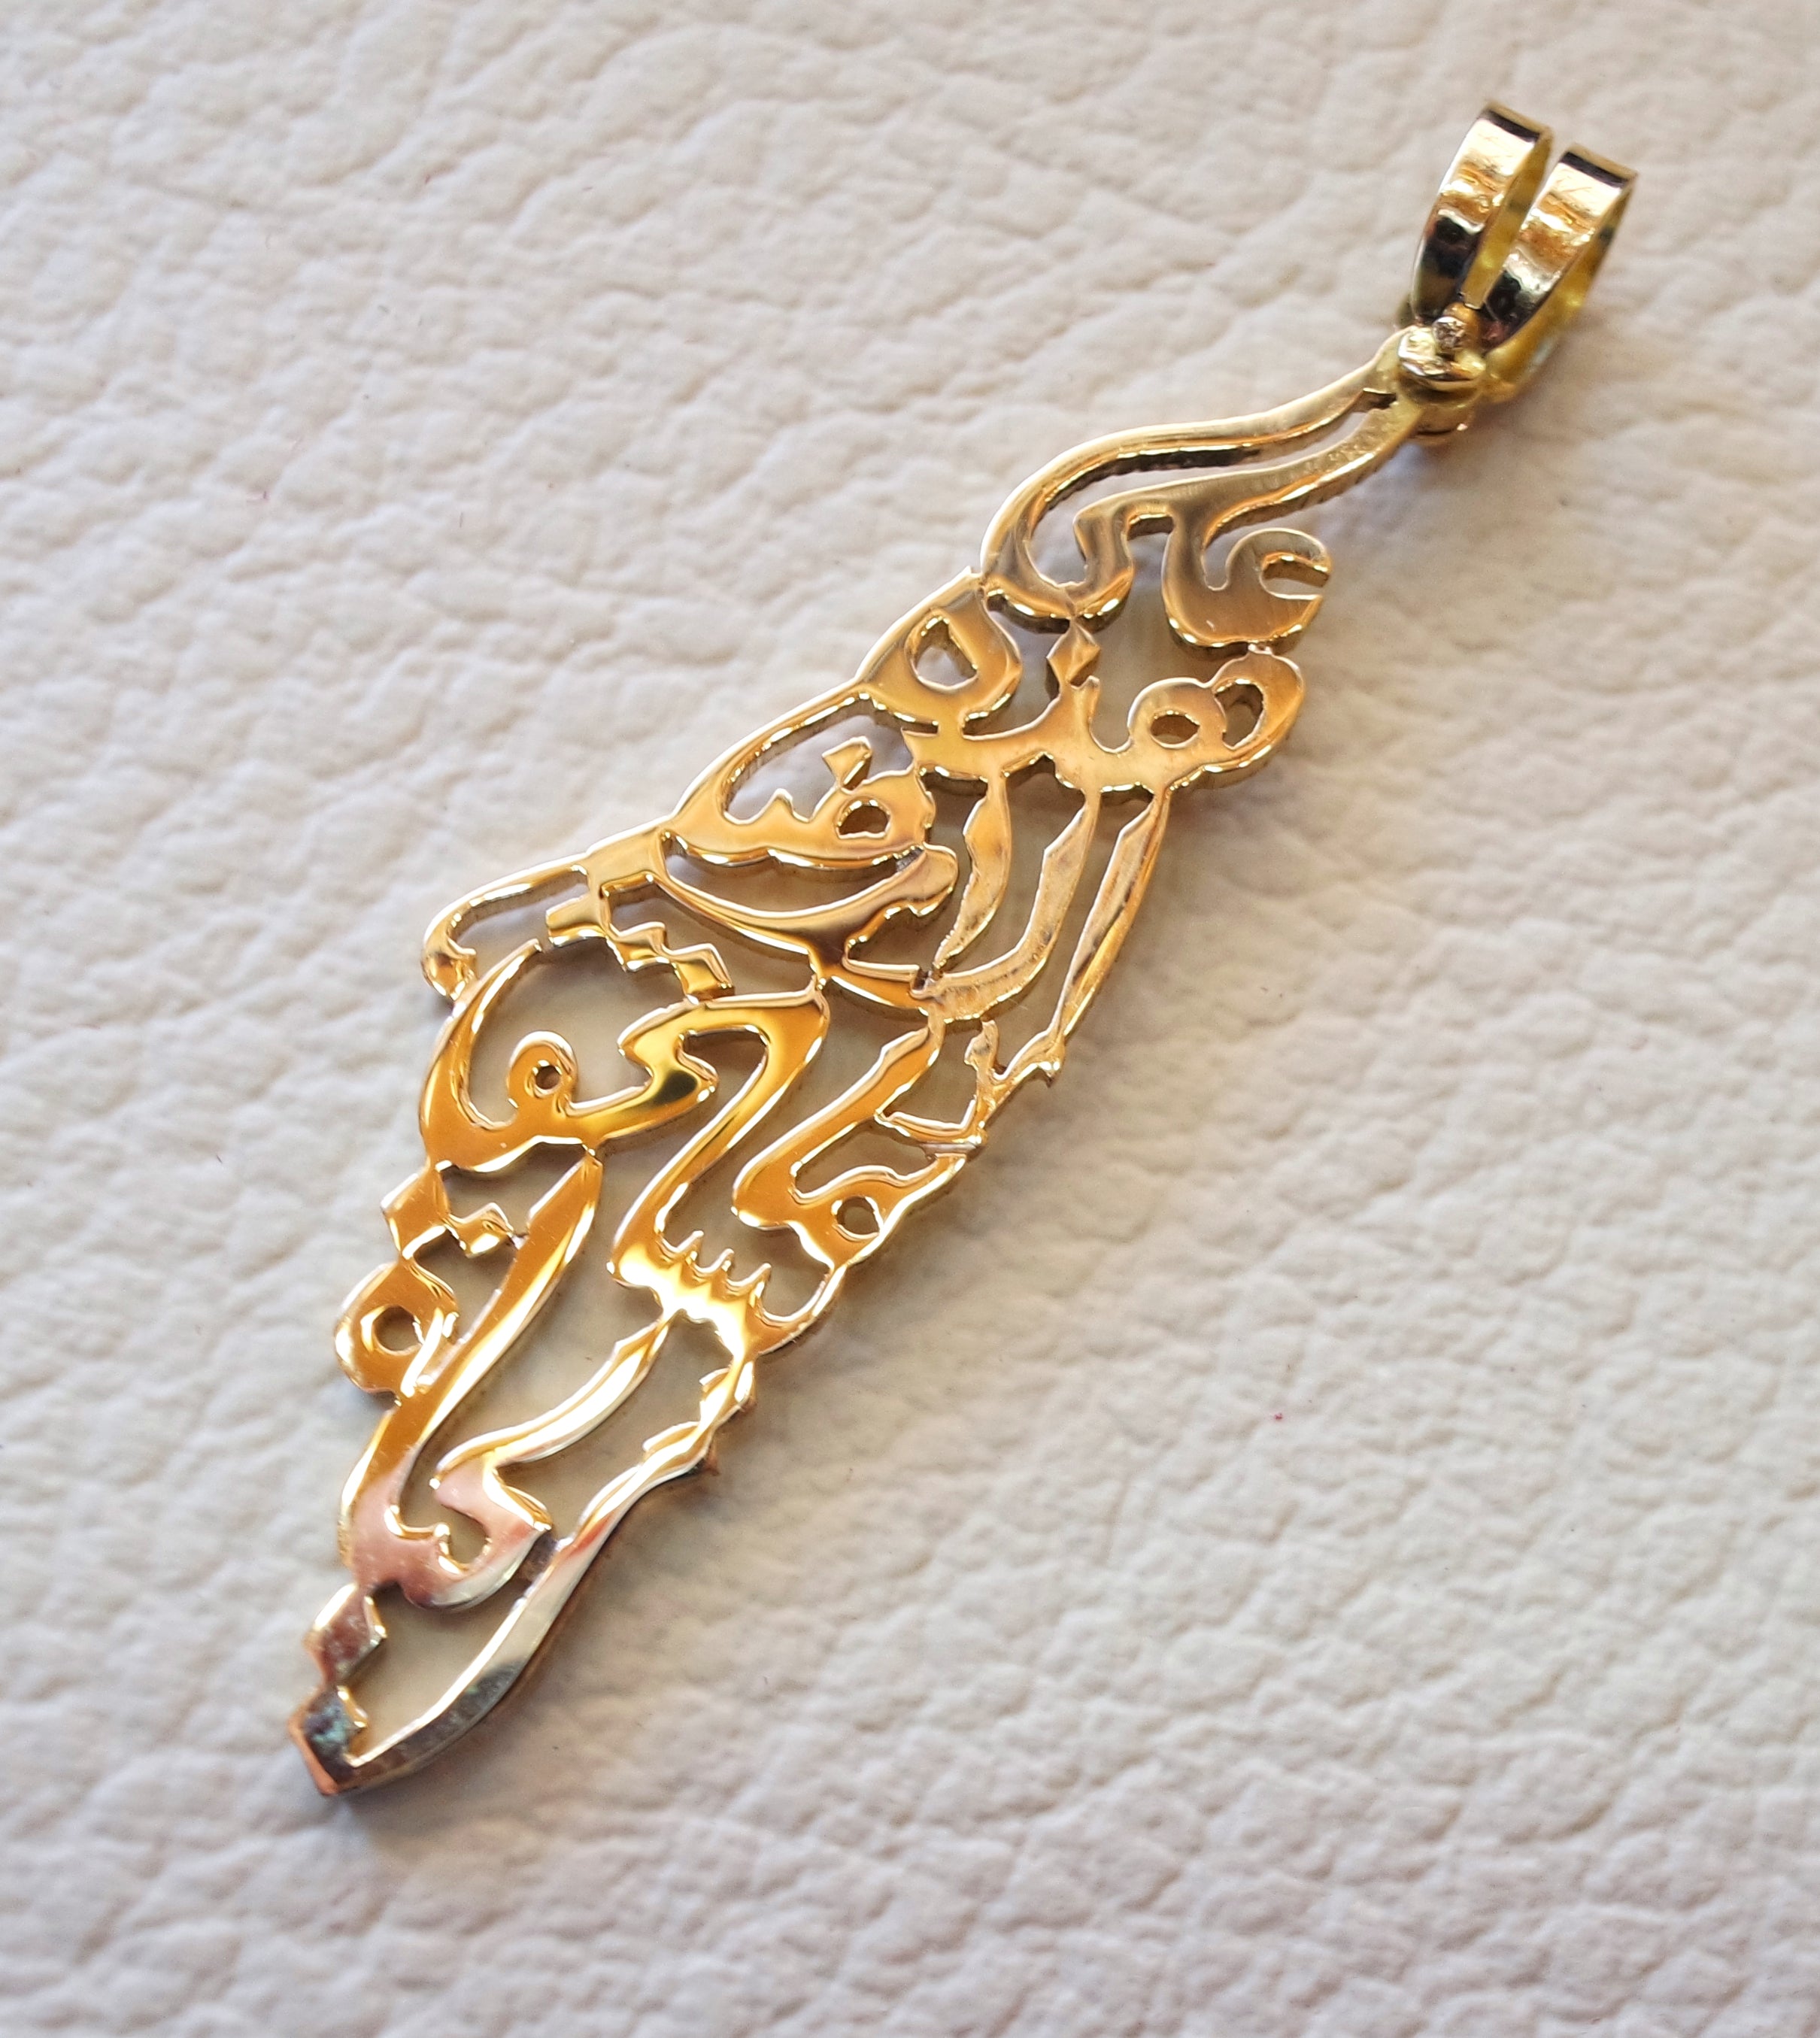 Palestine map pendant with chain famous poem verse 18 k gold jewelry arabic fast shipping خارطه و علم فلسطين